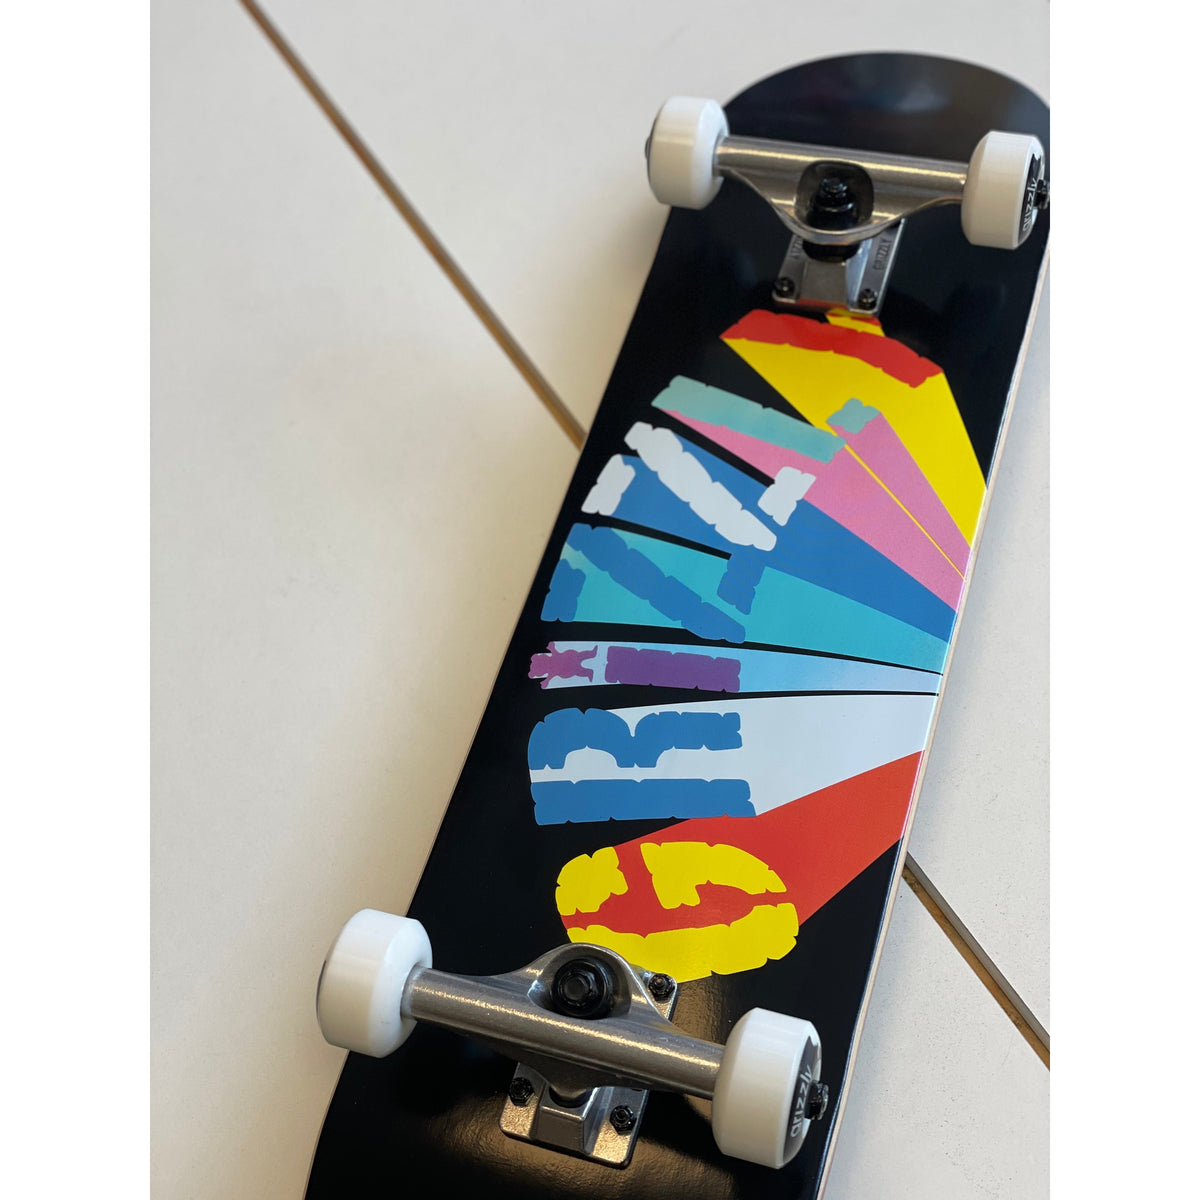 Grizzly Colour Wheel Complete Skateboard 7.75"